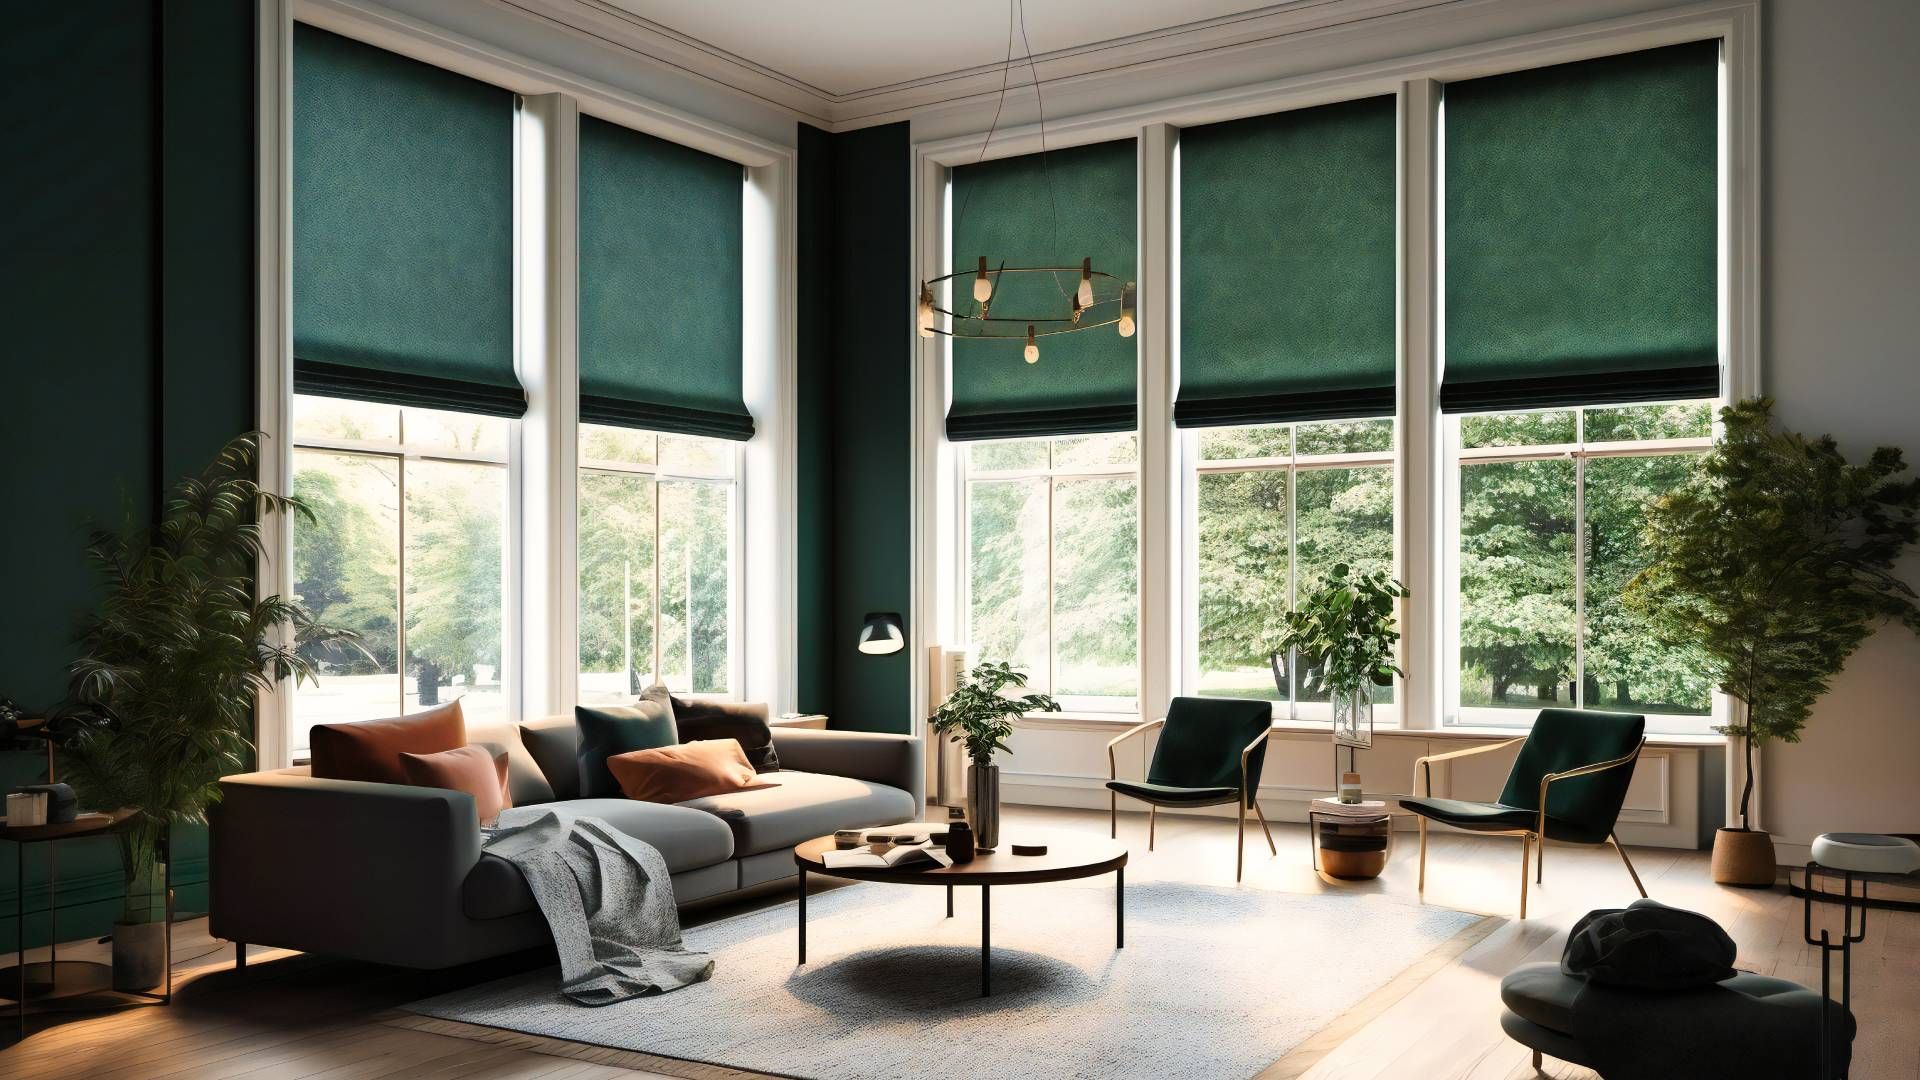 Simple living room with a green color scheme, several plants, and large windows with roller shades n